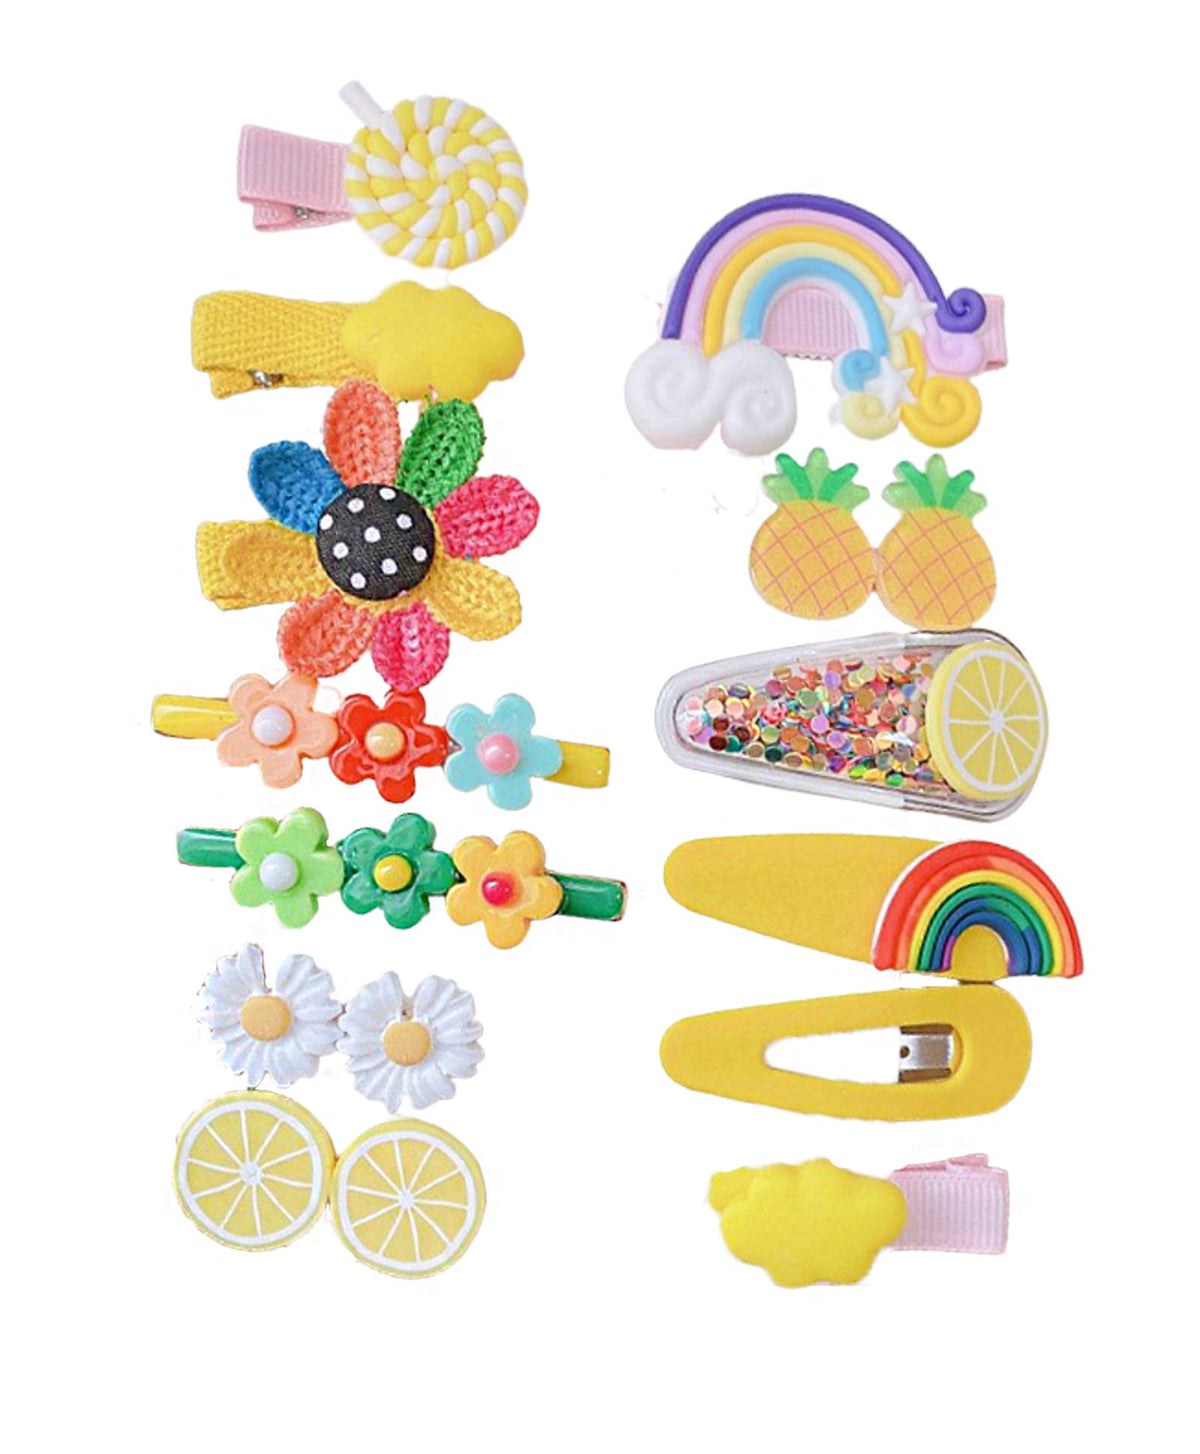 Melbees by Yellow Chimes Hair Clips for Girls Kids Hair Clip Hair Accessories For Girls Cute Characters Pretty Snap Hair Clips for Baby Girls 8 Pcs Yellow Alligator Clips for Hair Baby Hair Clips For Kids Toddlers